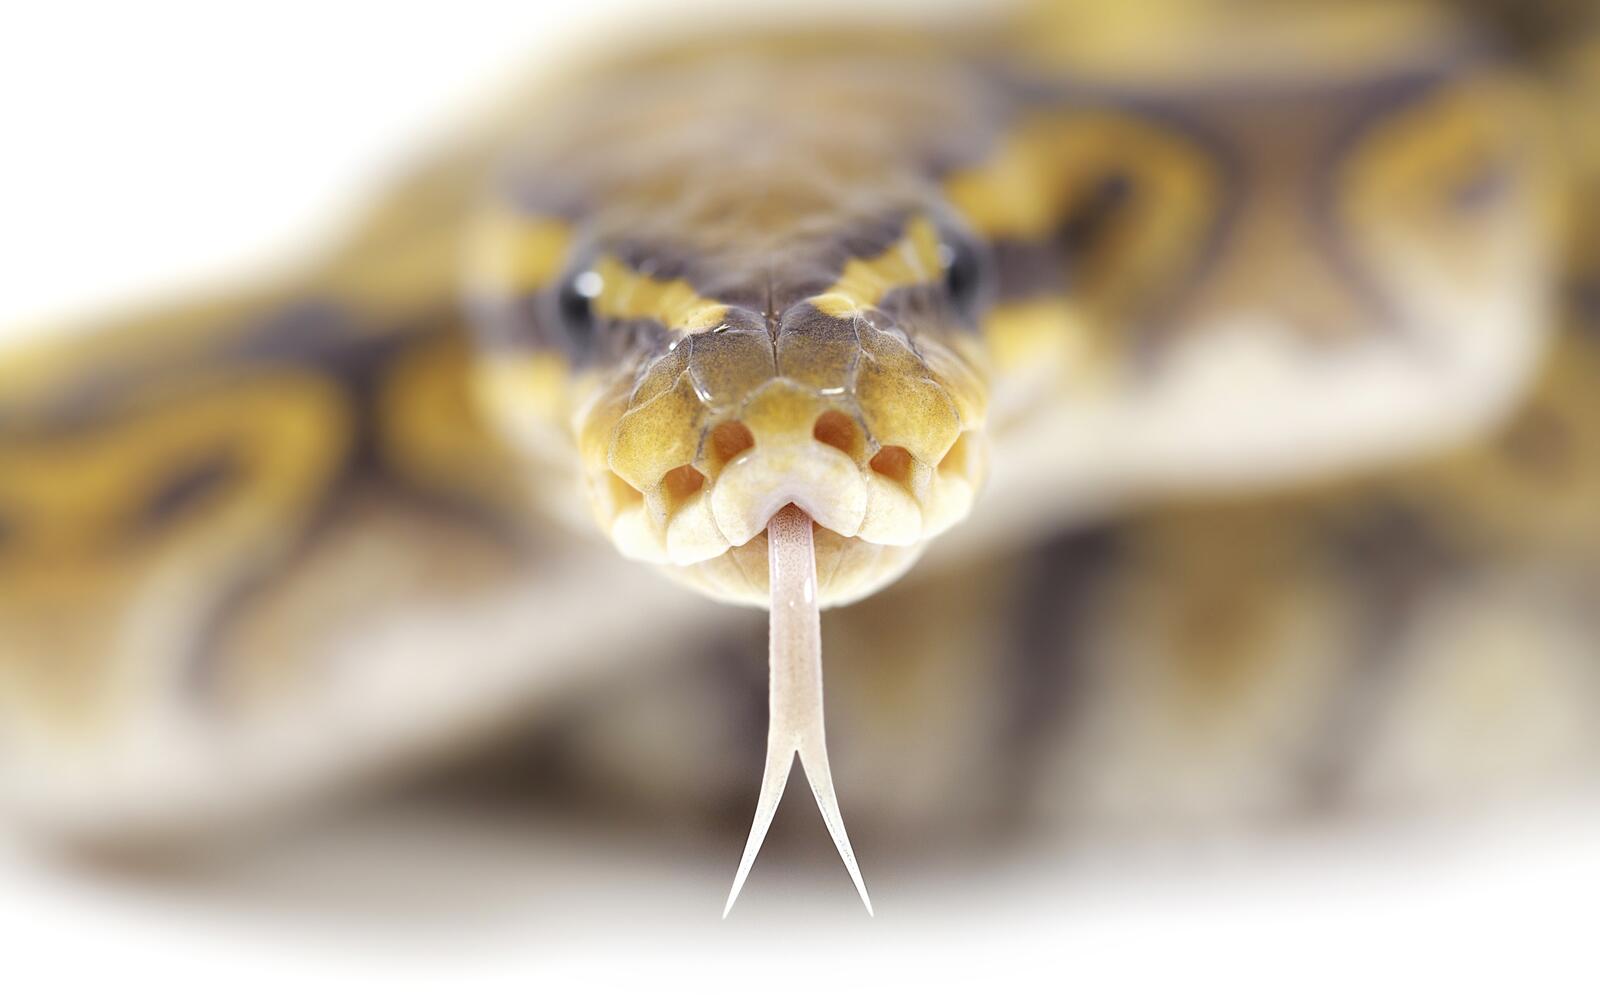 Wallpapers snake tongue spots on the desktop